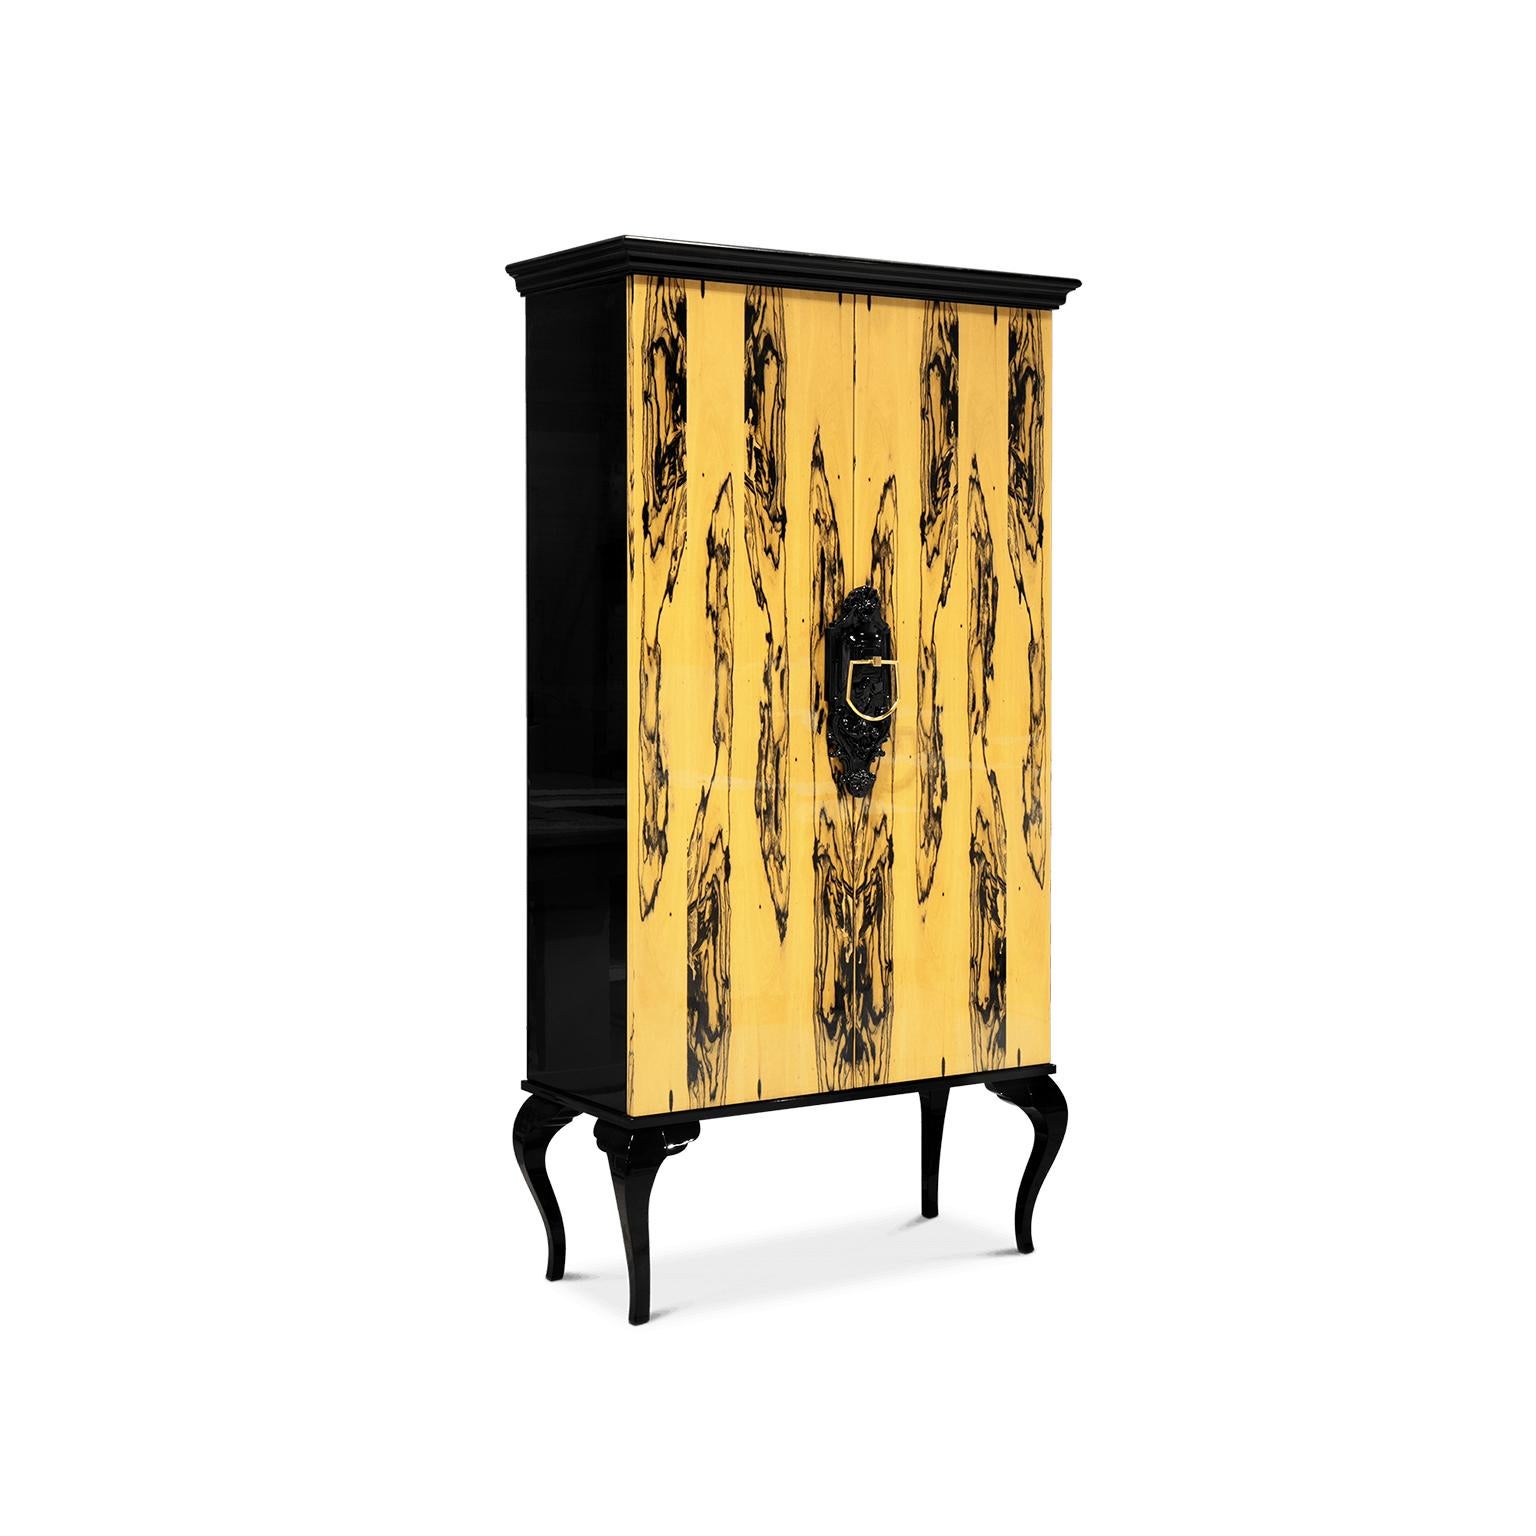 The internationally renowned art spot and one of the most significant architectural icons of the 20th century, the Guggenheim Museum, has inspired the concept of this astonishing cabinet. Boca do Lobo believes the Guggenheim cabinet fits between the